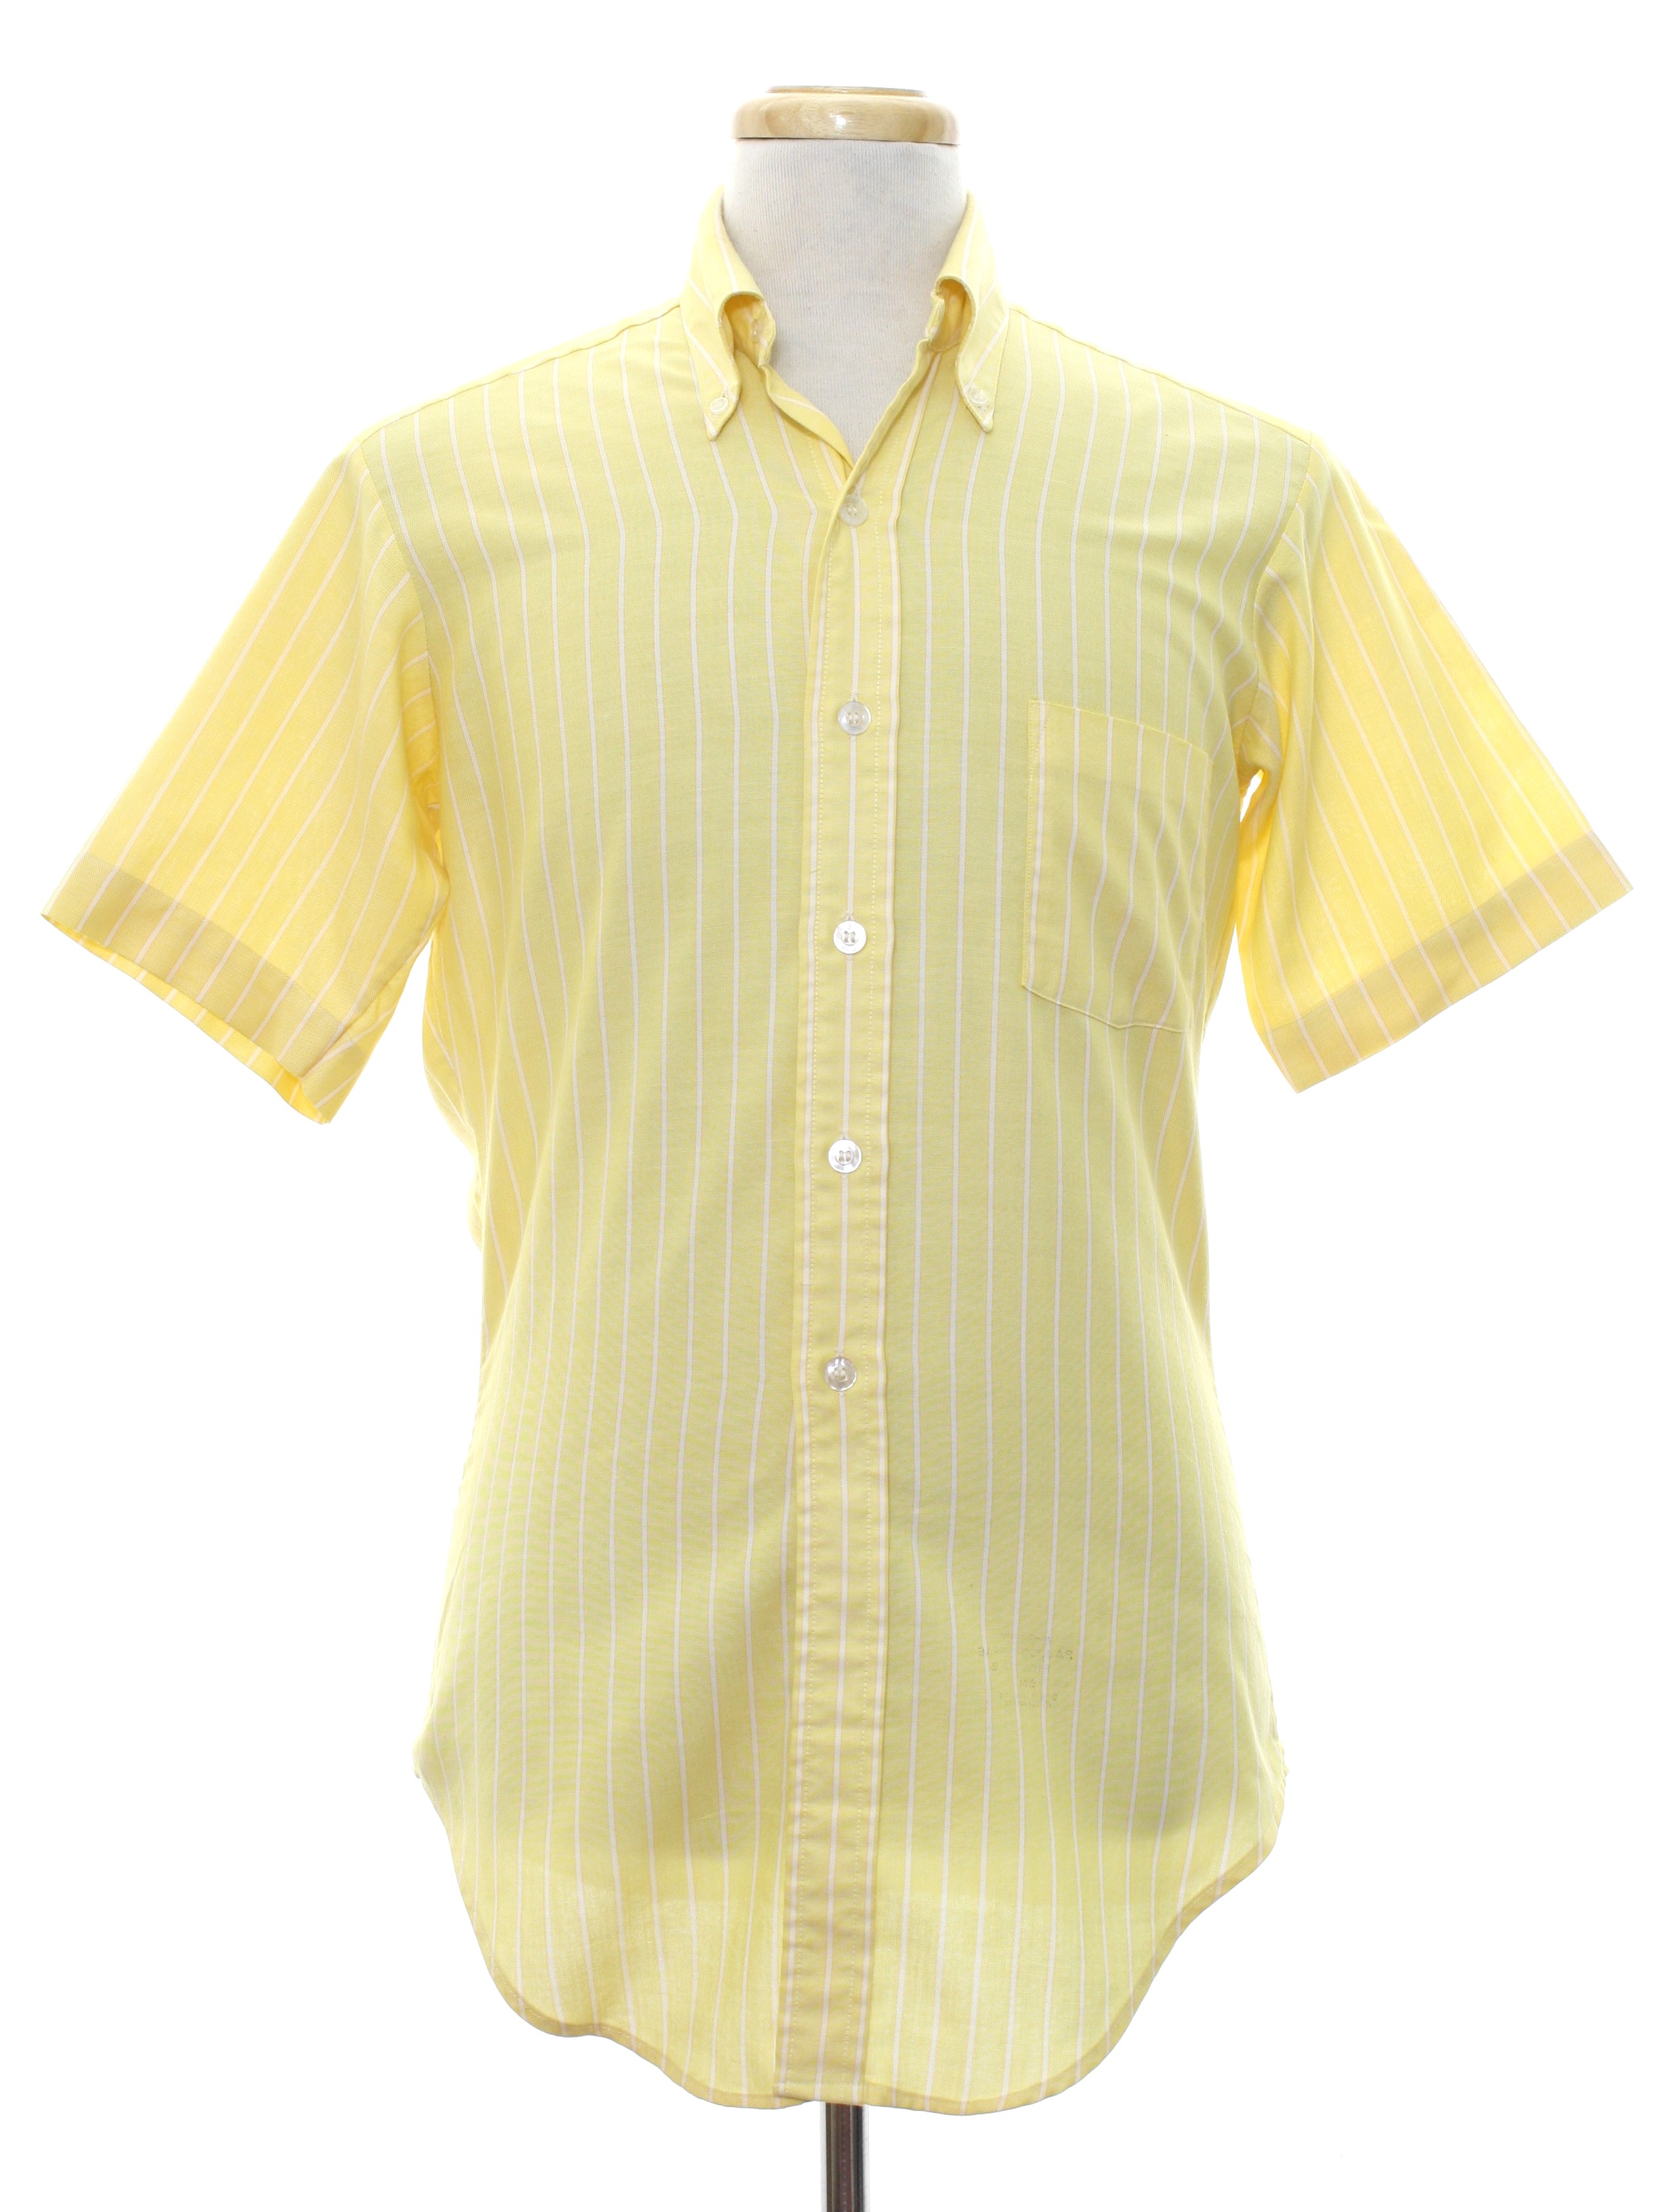 Eighties Vintage Shirt: 80s -Sears- Mens yellow background cotton ...